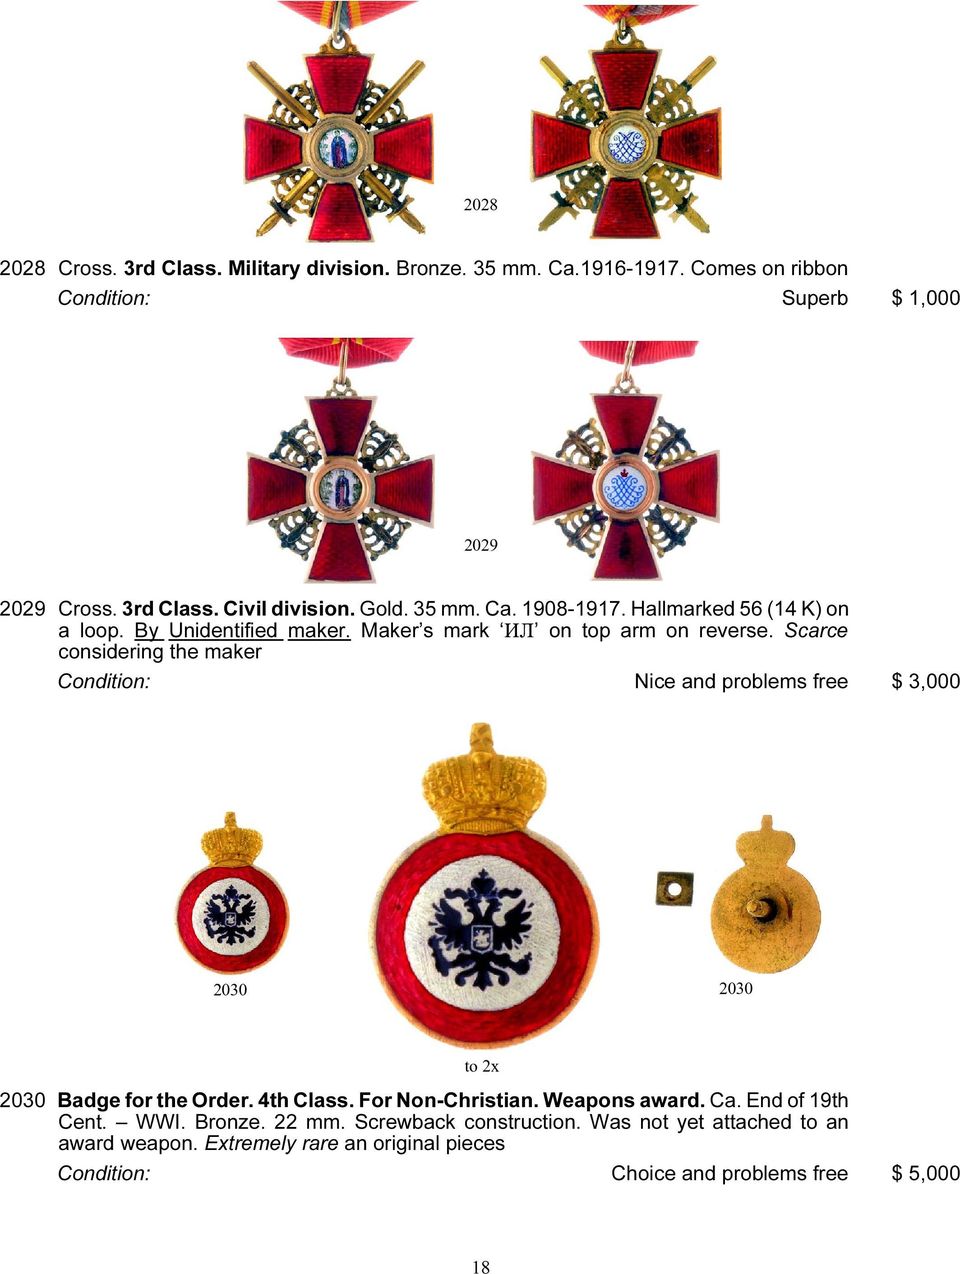 Scarce considering the maker Condition: Nice and problems free $ 3,000 2030 2030 to 2x 2030 Badge for the Order. 4th Class. For Non-Christian. Weapons award.